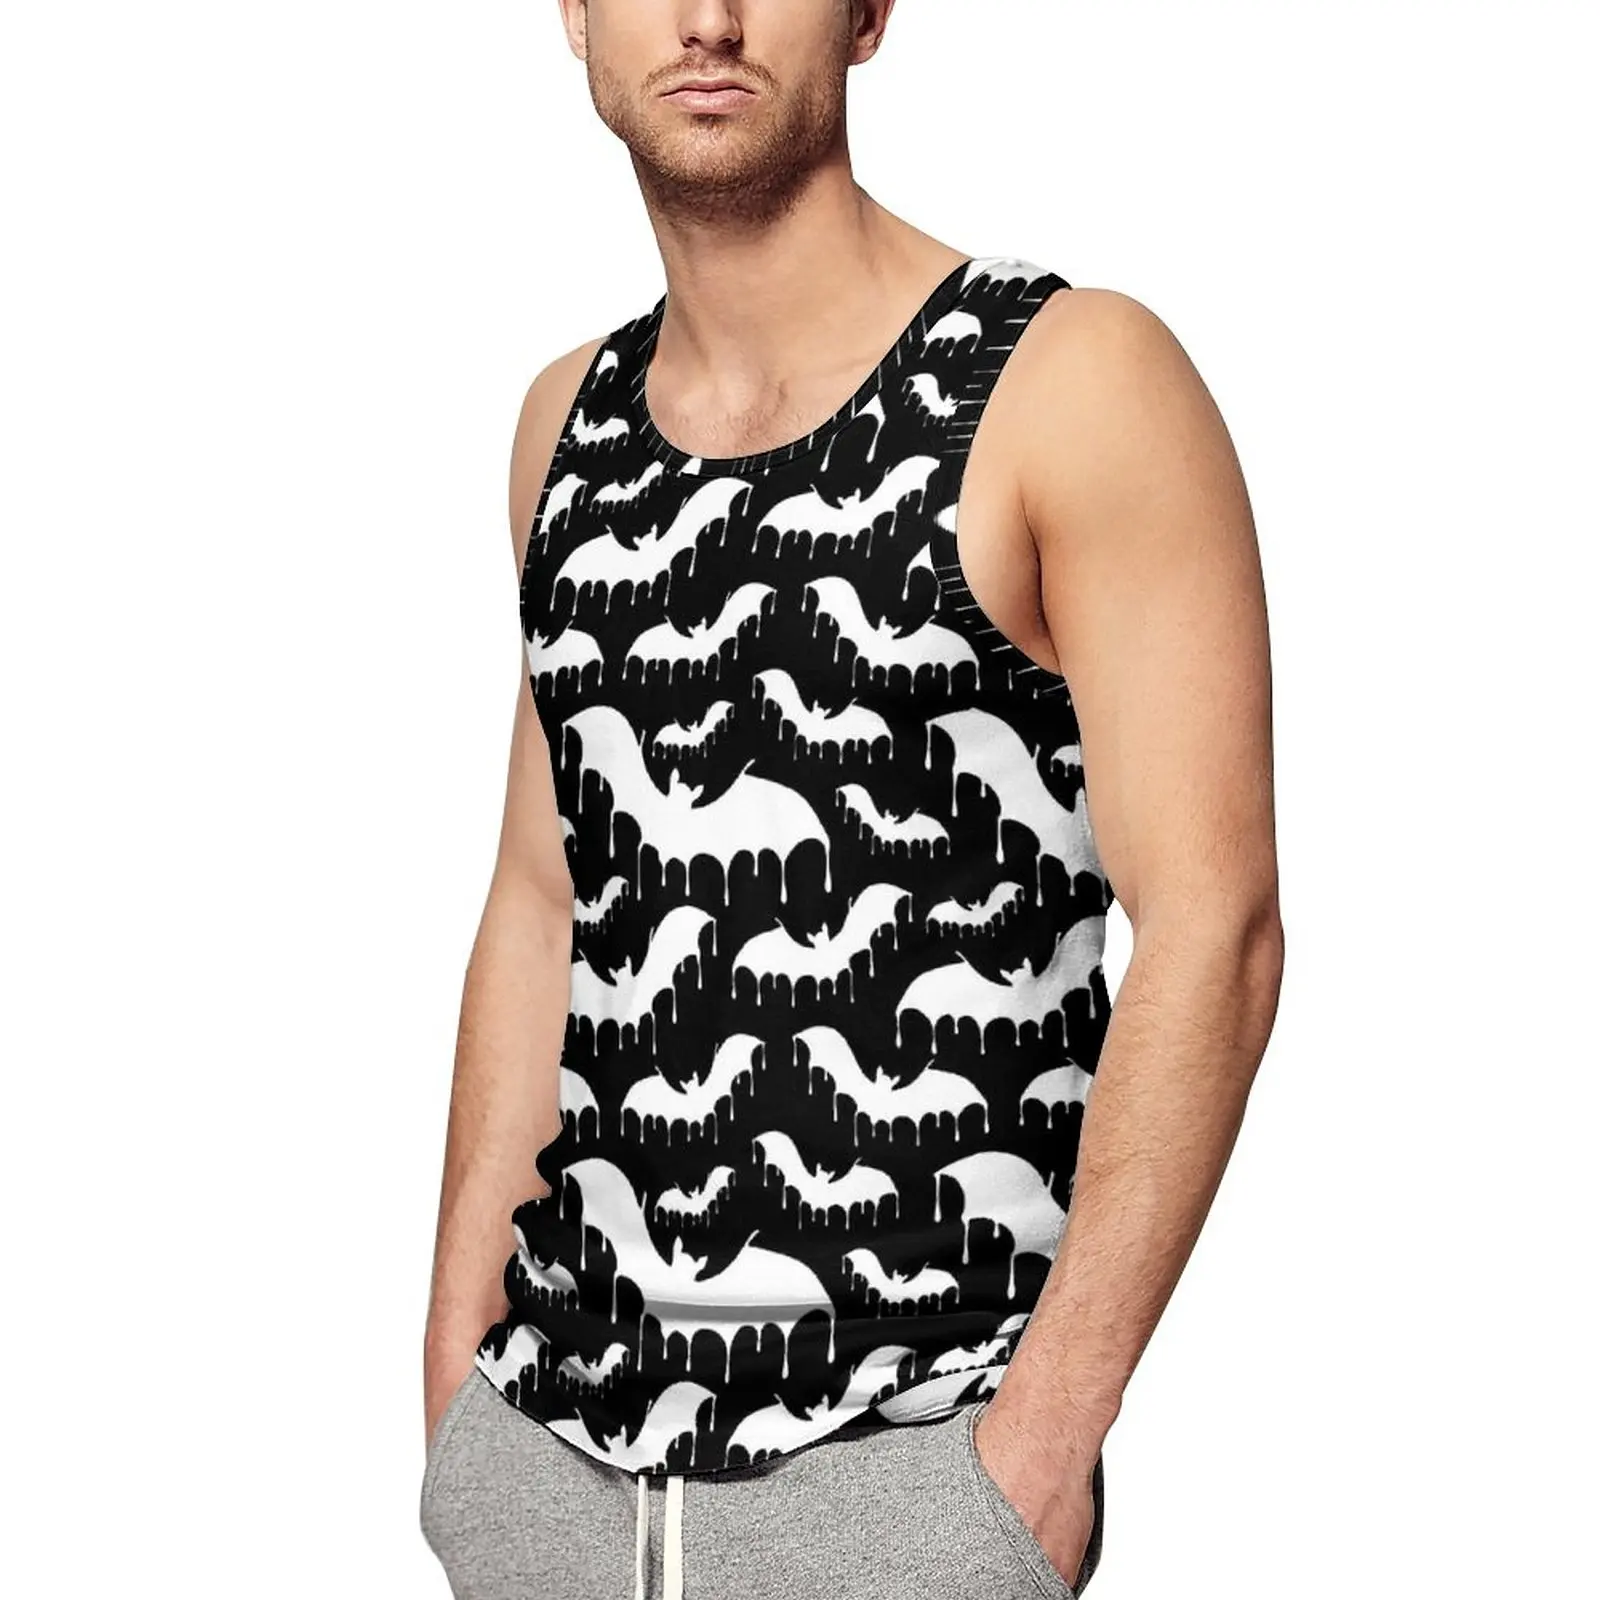 

White Bat Tank Top Gothic Halloween Fashion Tops Daily Workout Males Pattern Sleeveless Vests Plus Size